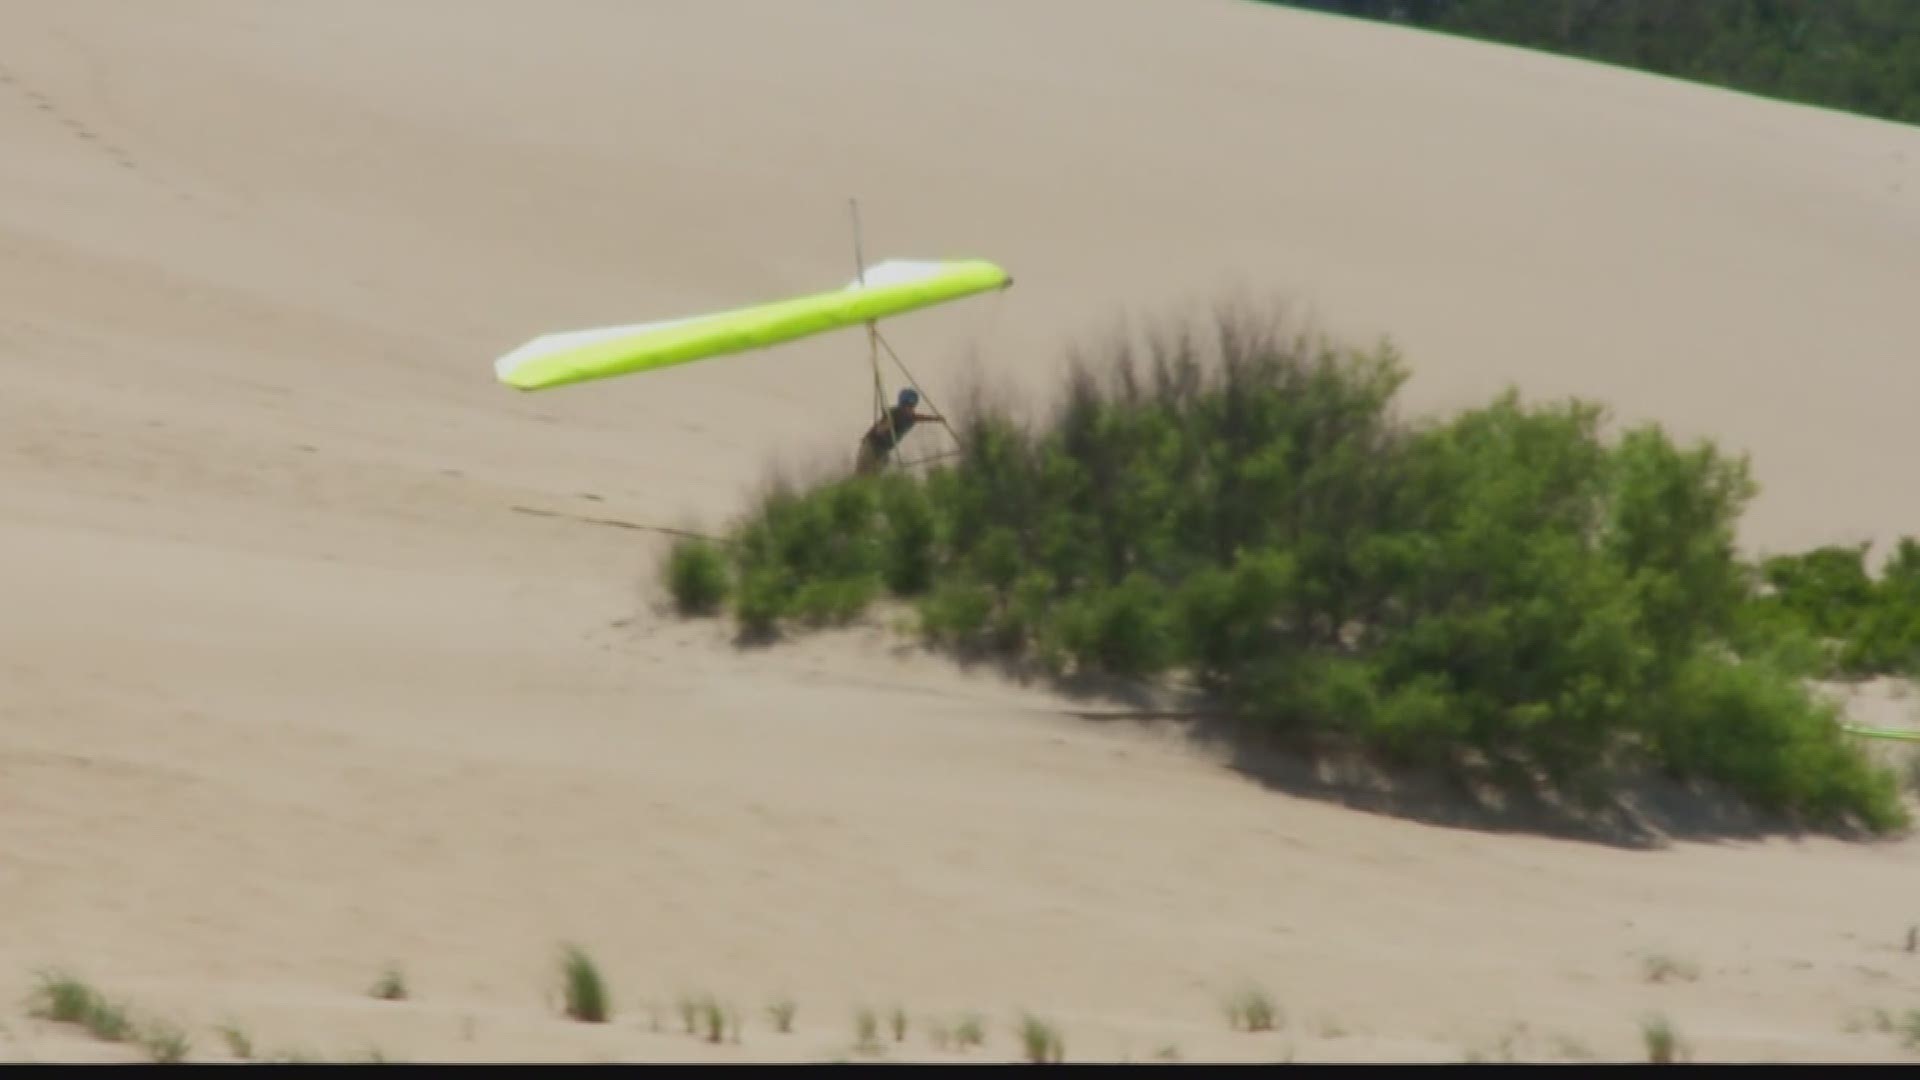 Above the dunes and on them, people find some great recreational activities at Jockey's Ridge State Park on the Outer Banks.